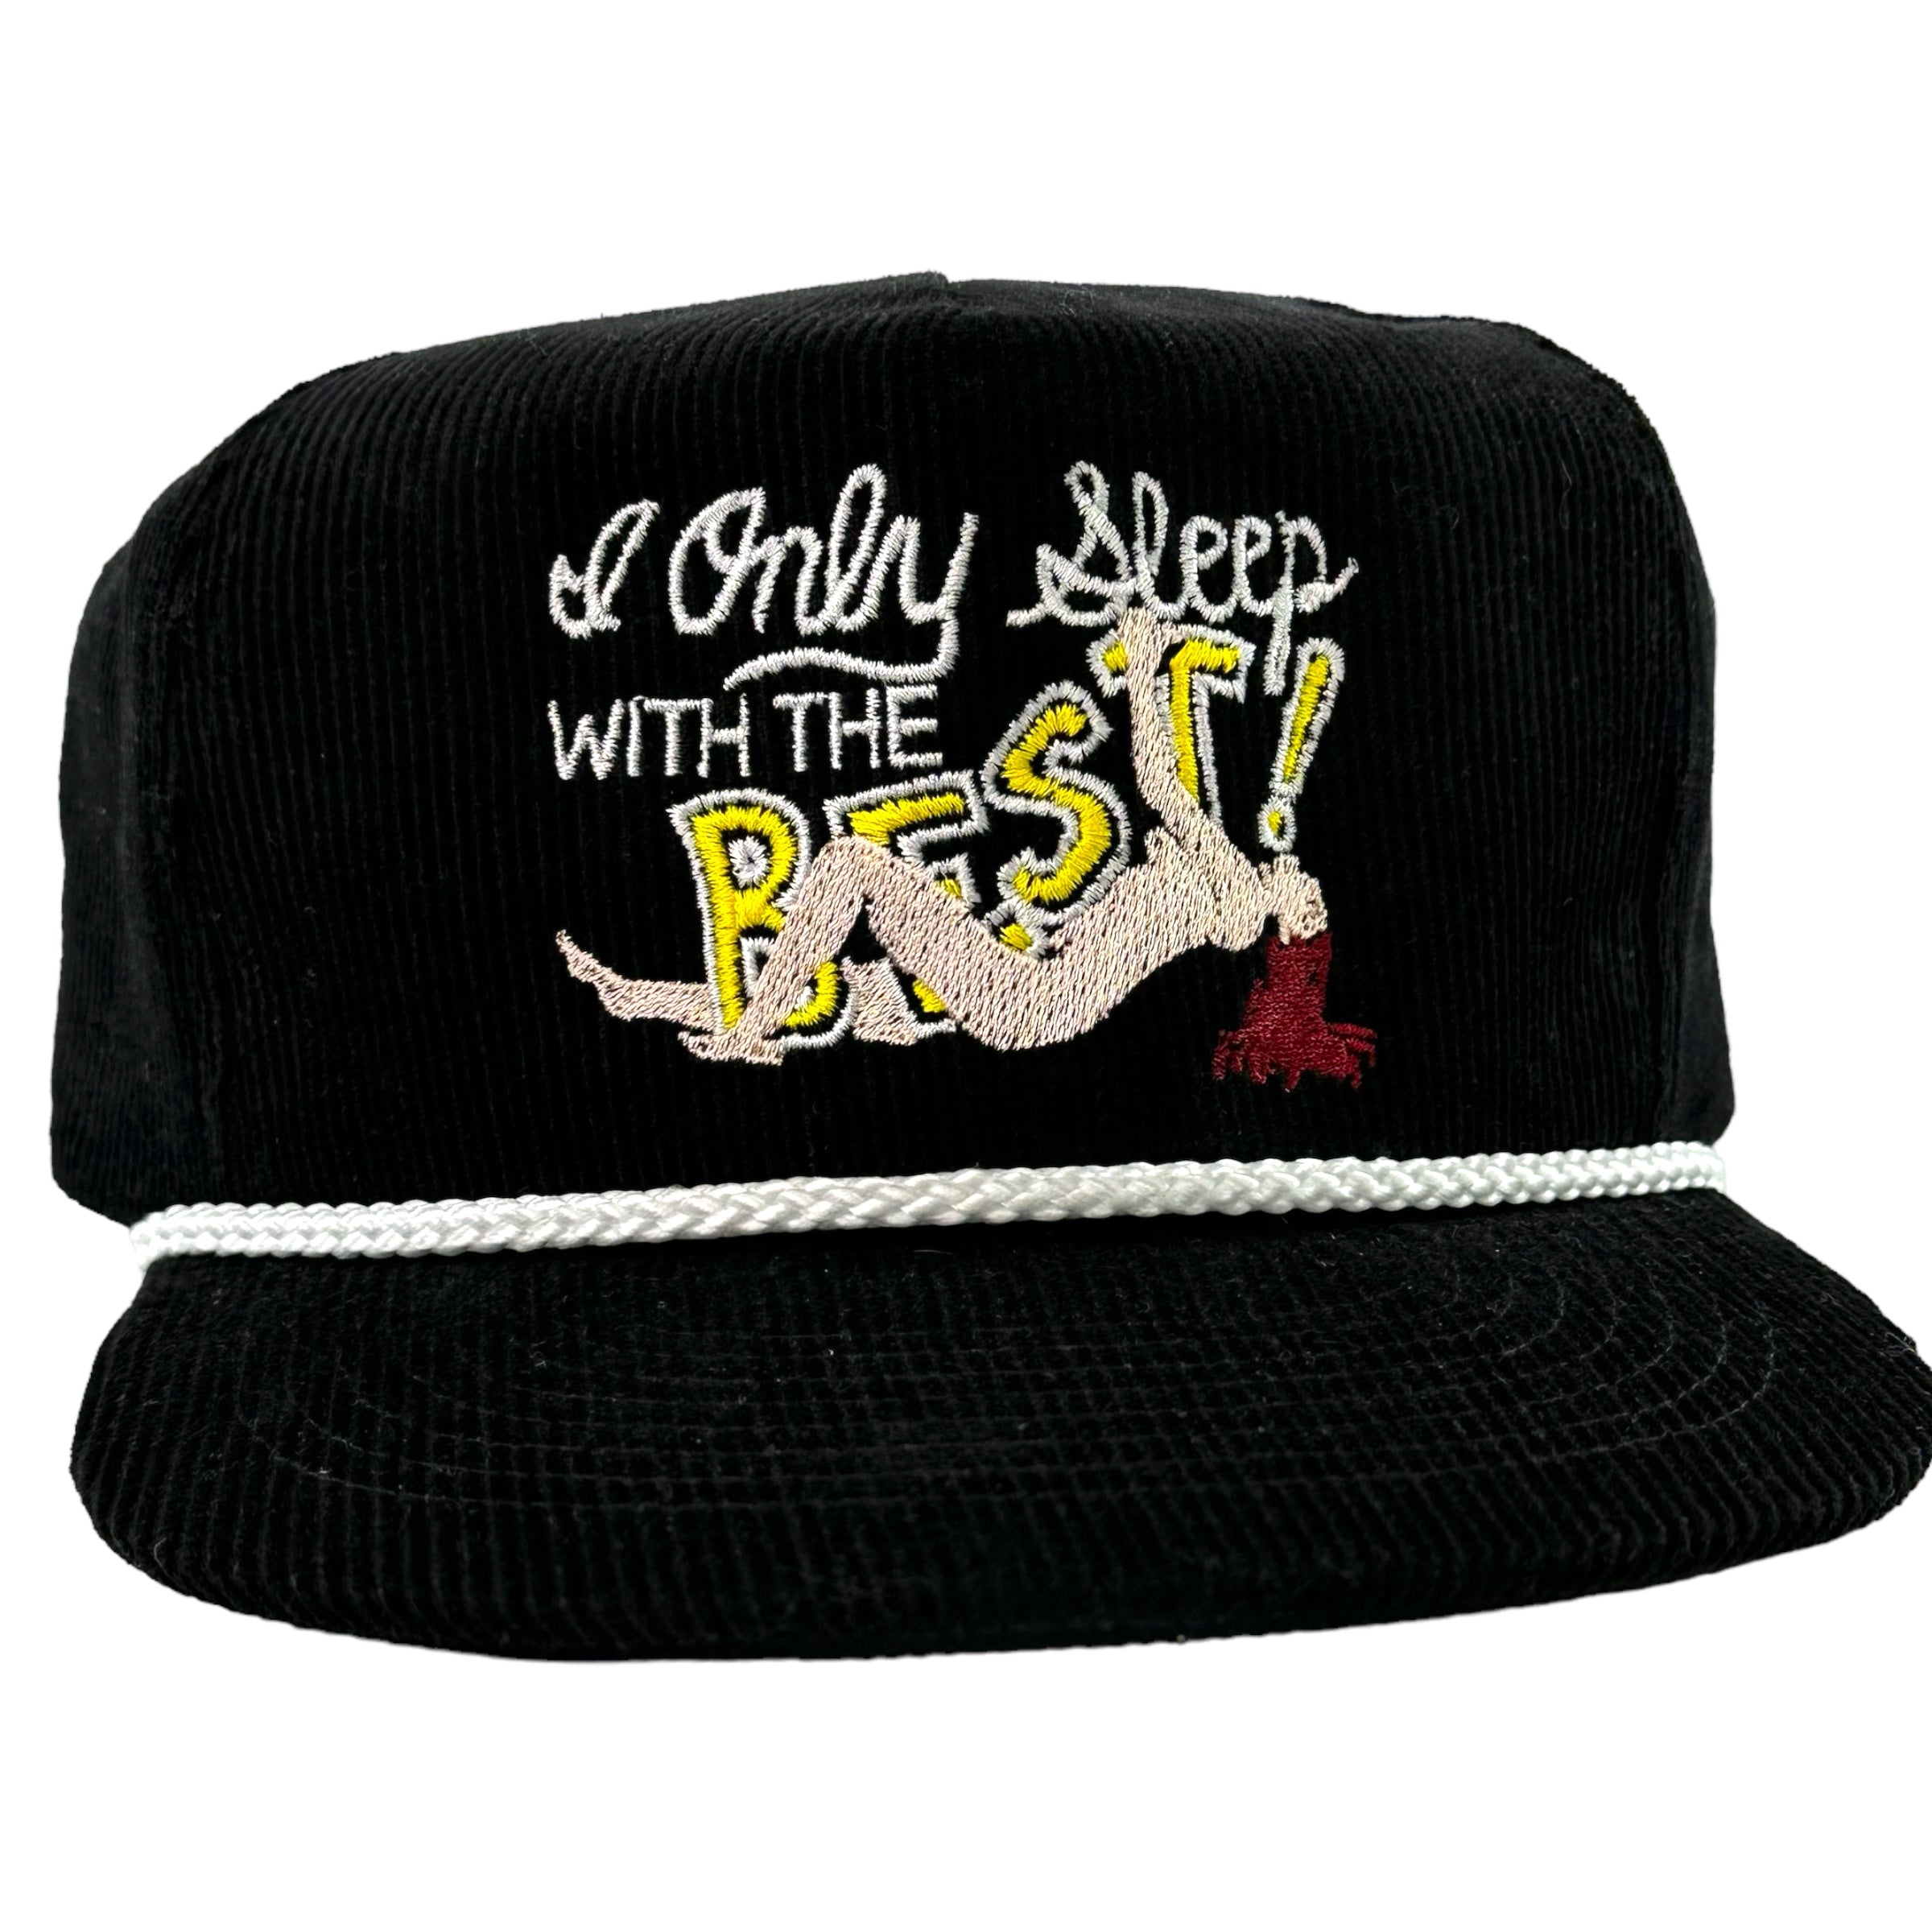 I ONLY SLEEP WITH THE BEST Funny Hat White Rope Black ￼ Corduroy ￼ Sna –  Old School Hats